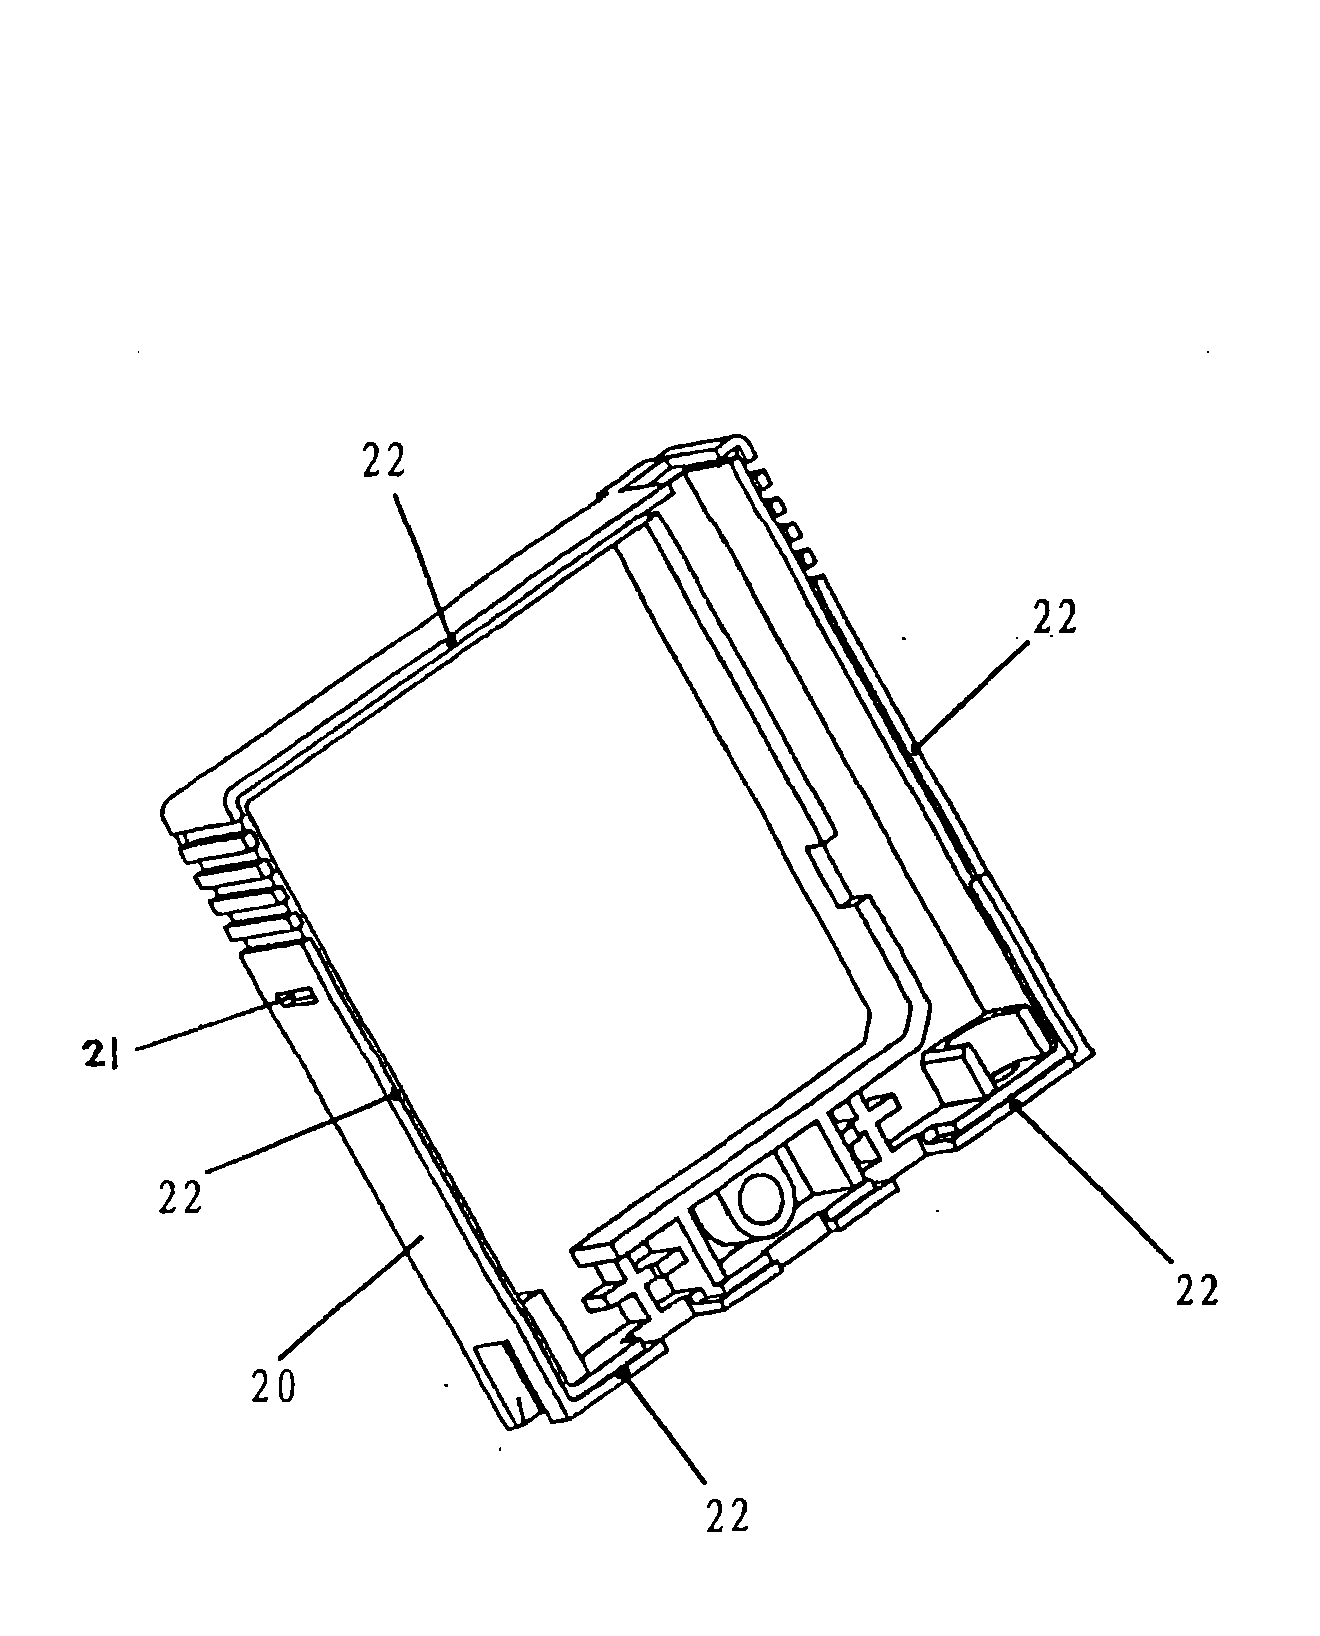 Connect-disconnect module and substrate for electrophoresis protector